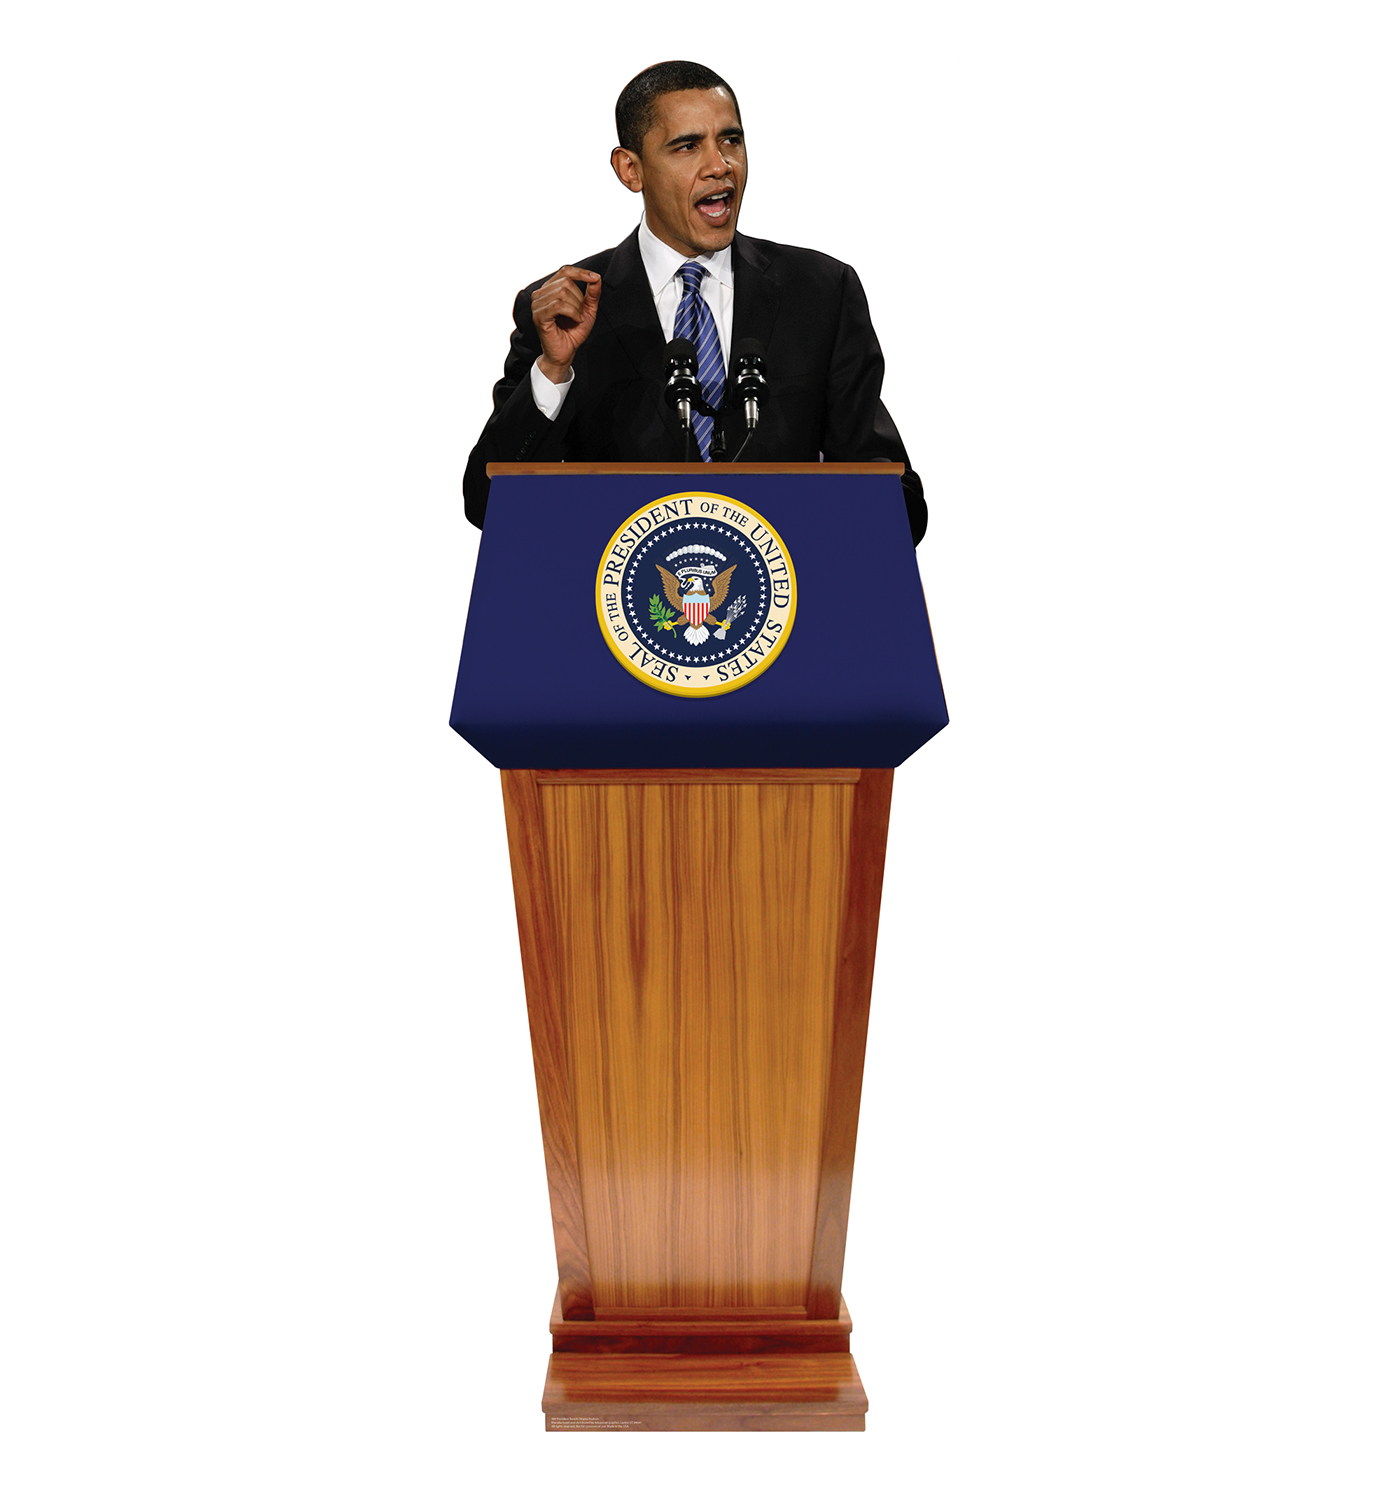 Free president cliparts download. Podium clipart presidential